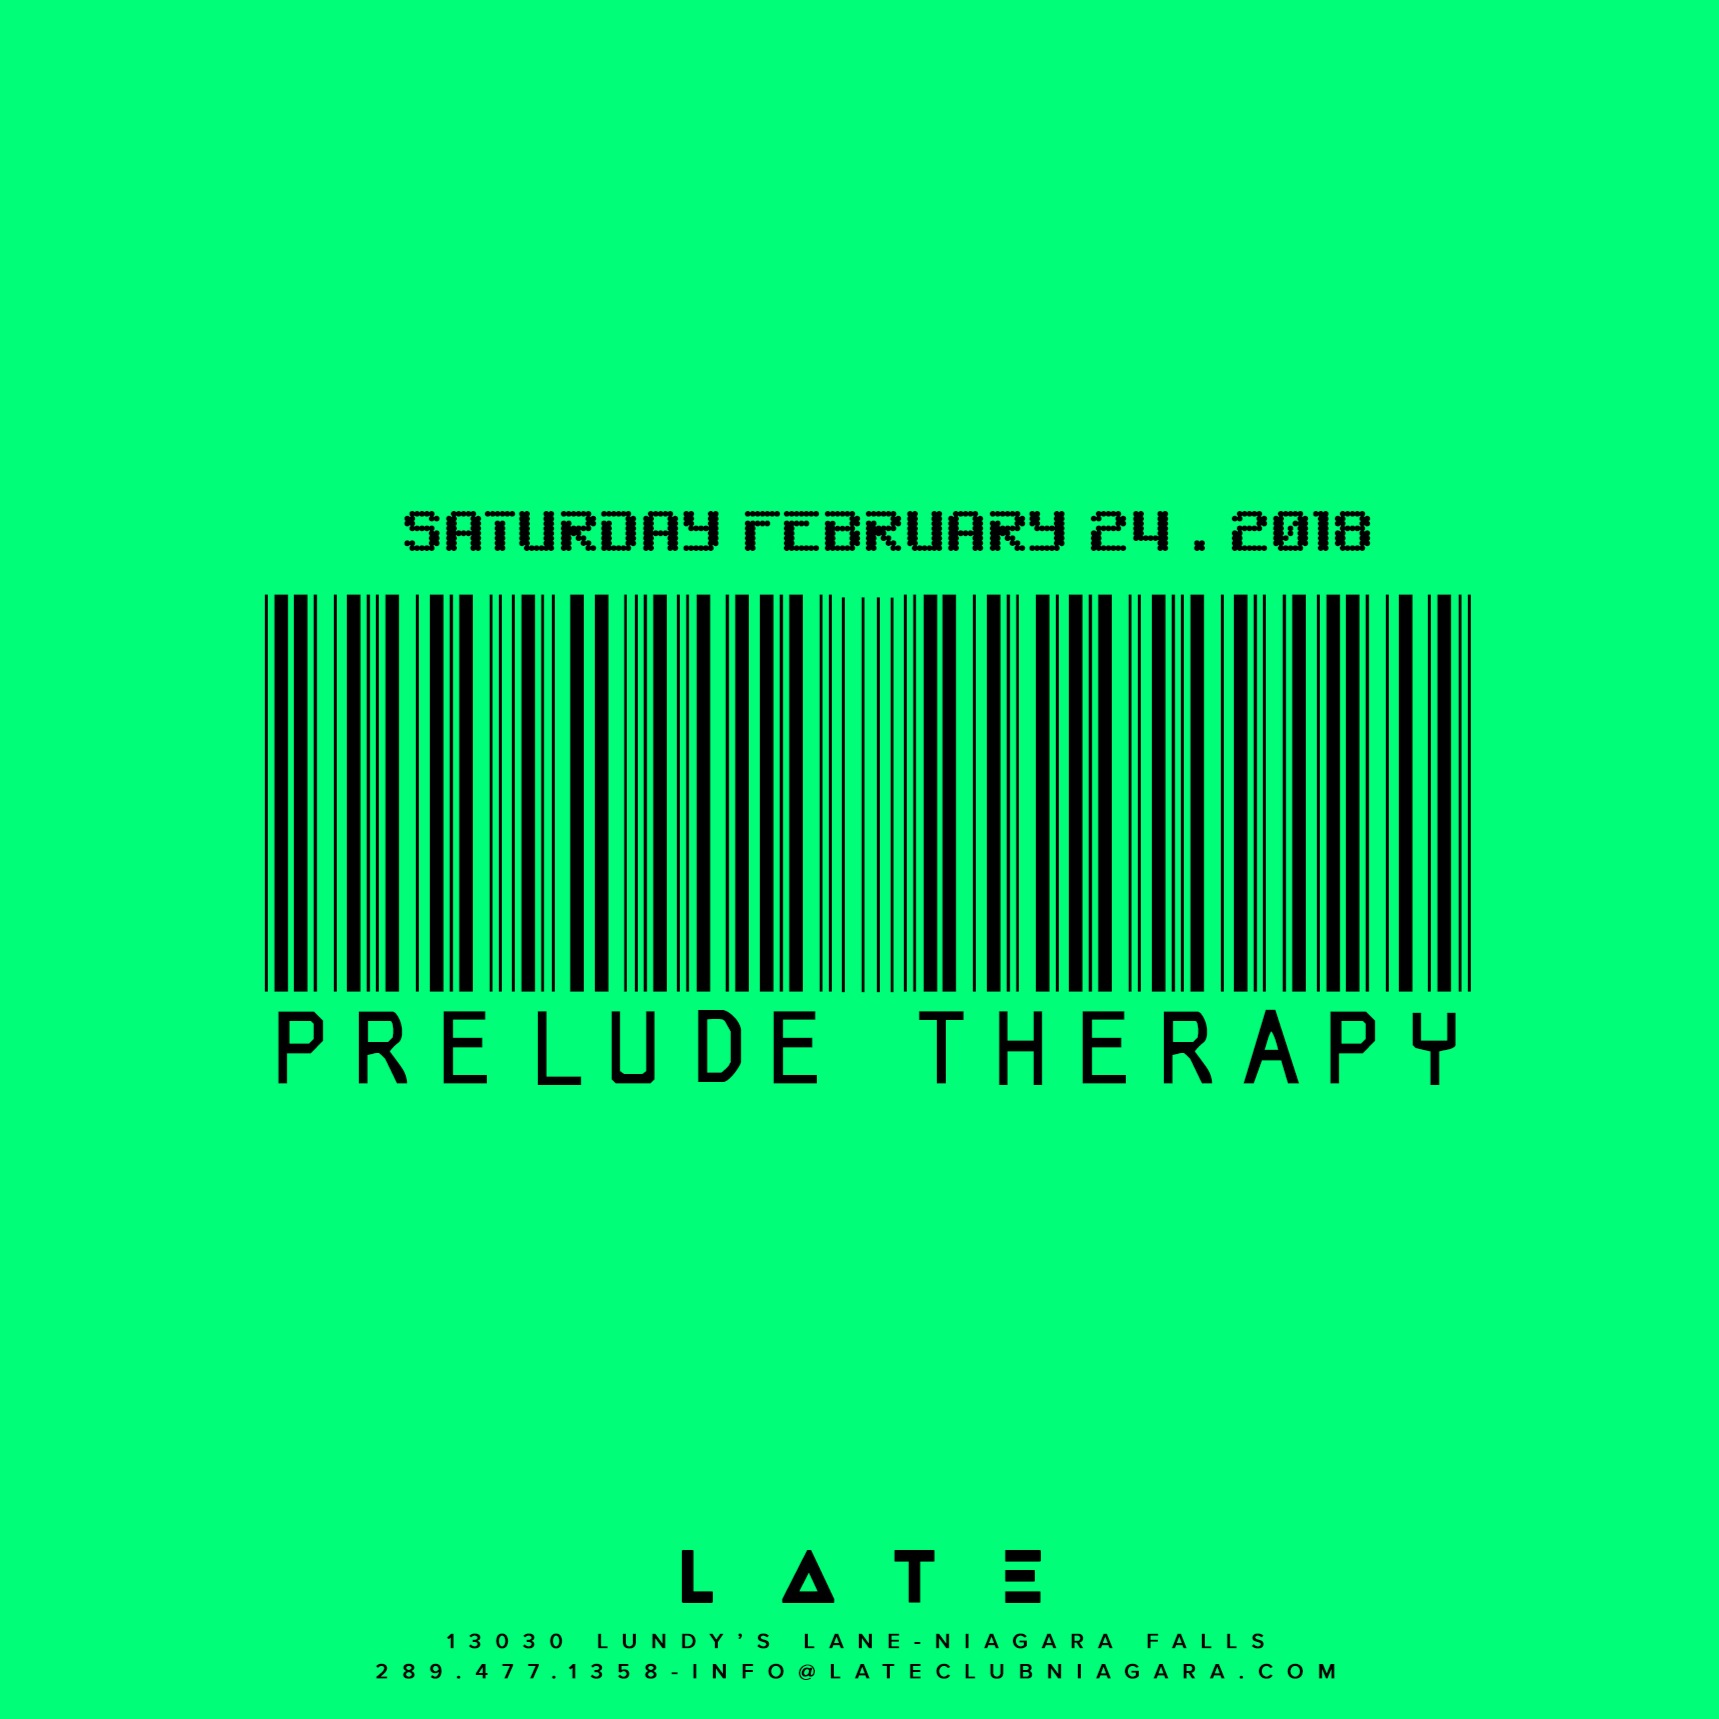 PRELUDE THERAPY